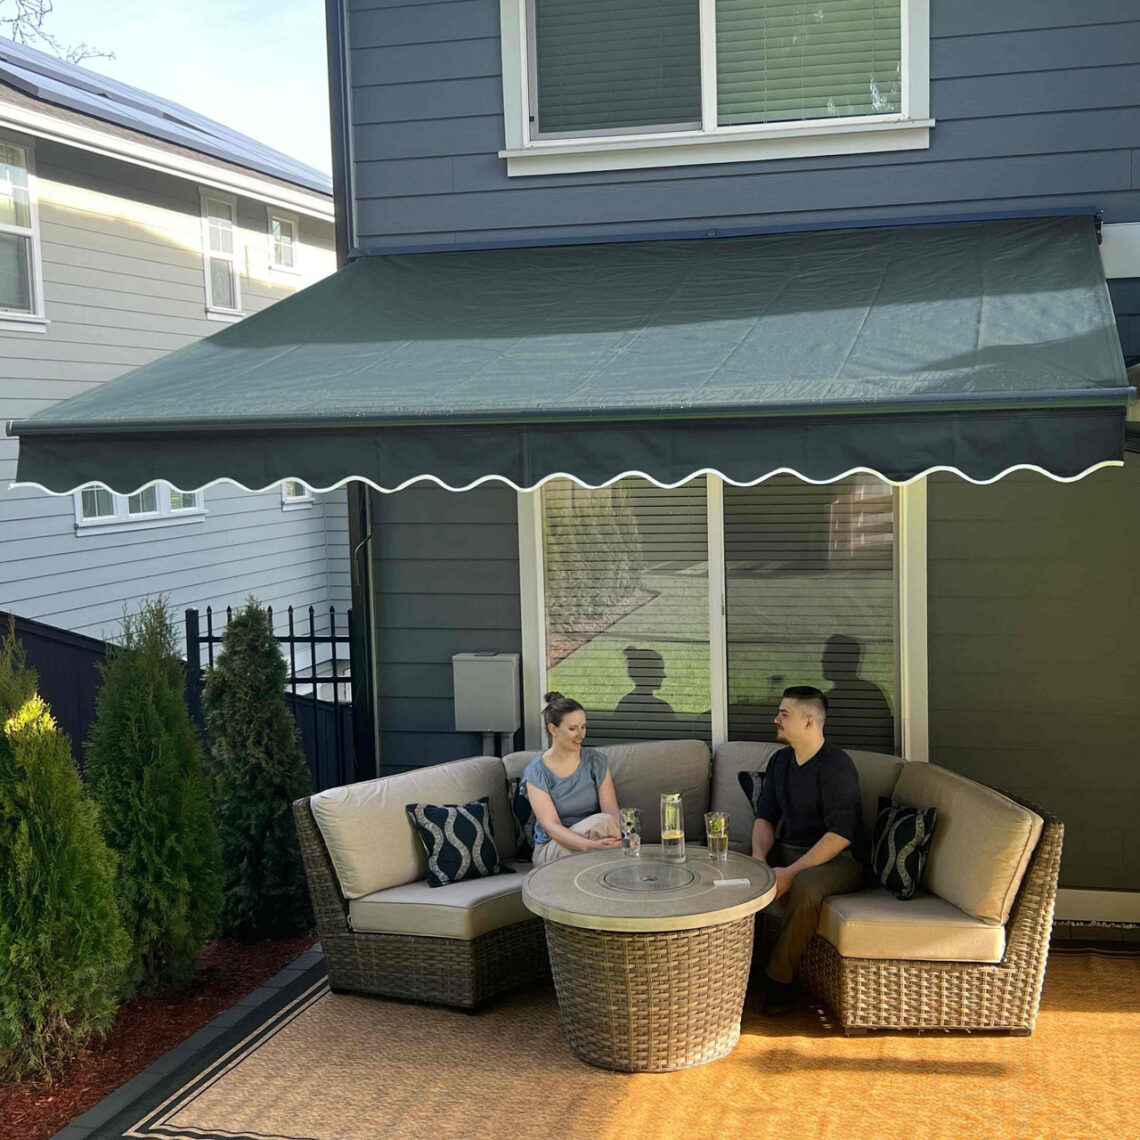 Retractable Awning Installation: Should You Do It Yourself Or Hire a Professional?